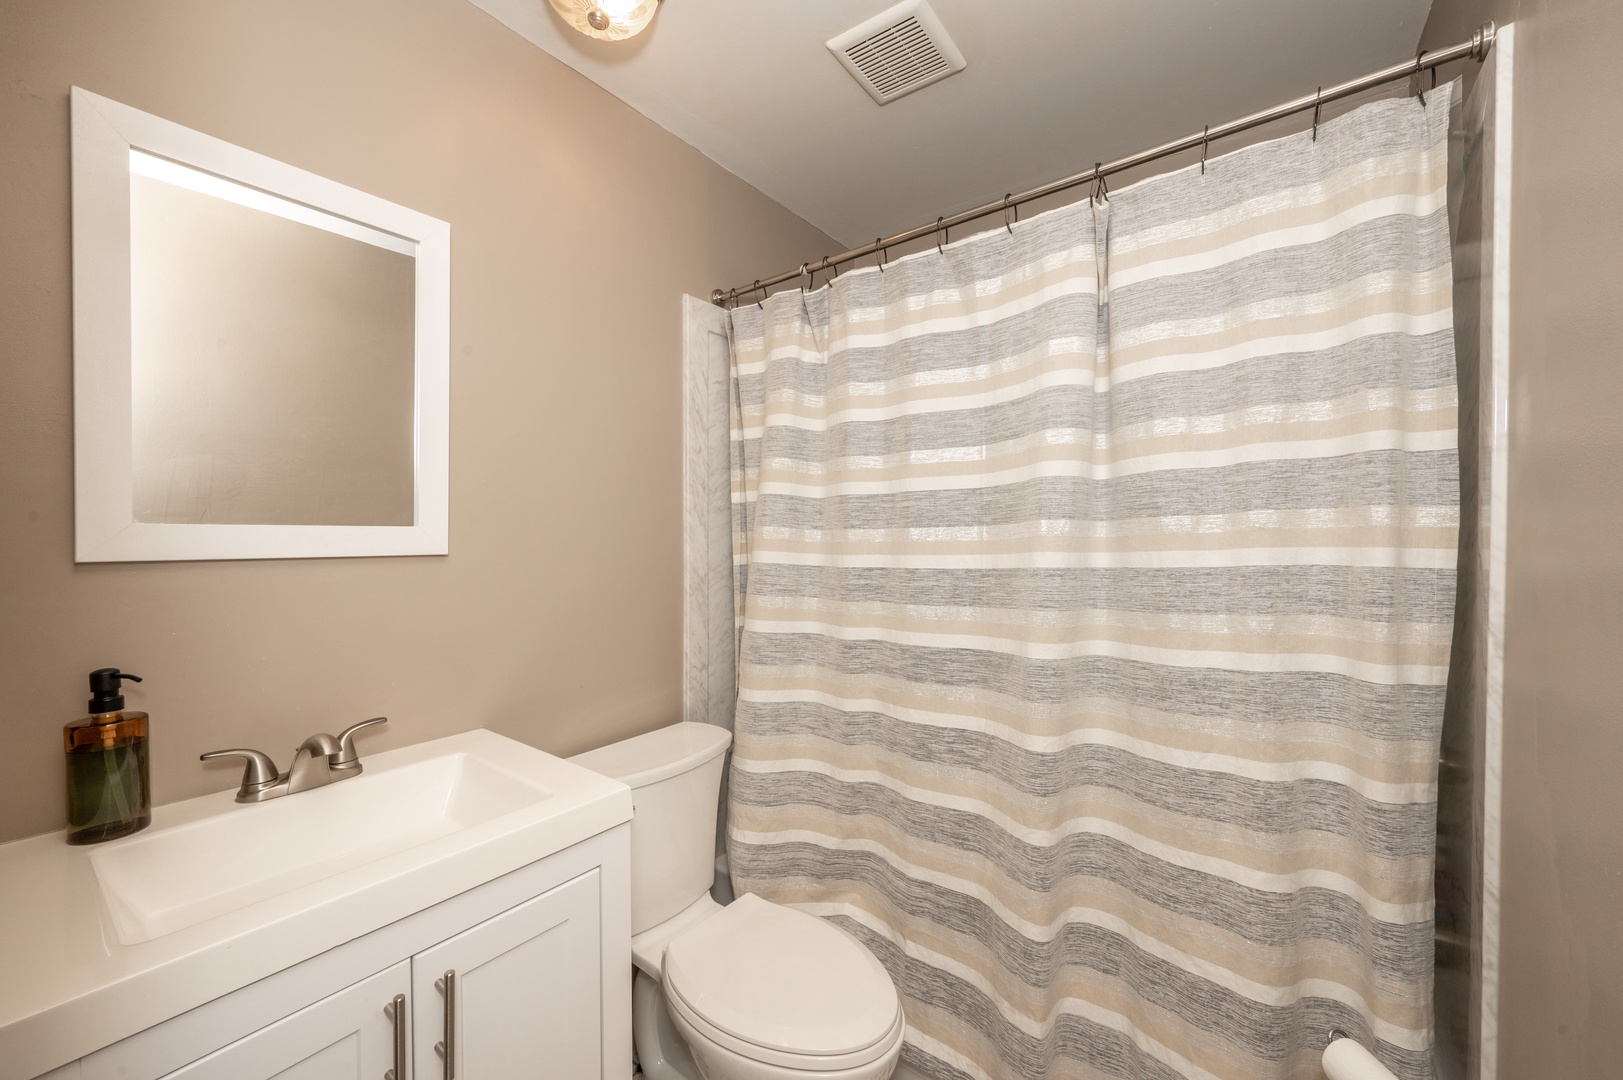 The full bathroom of this charming condo offers a shower/tub combo